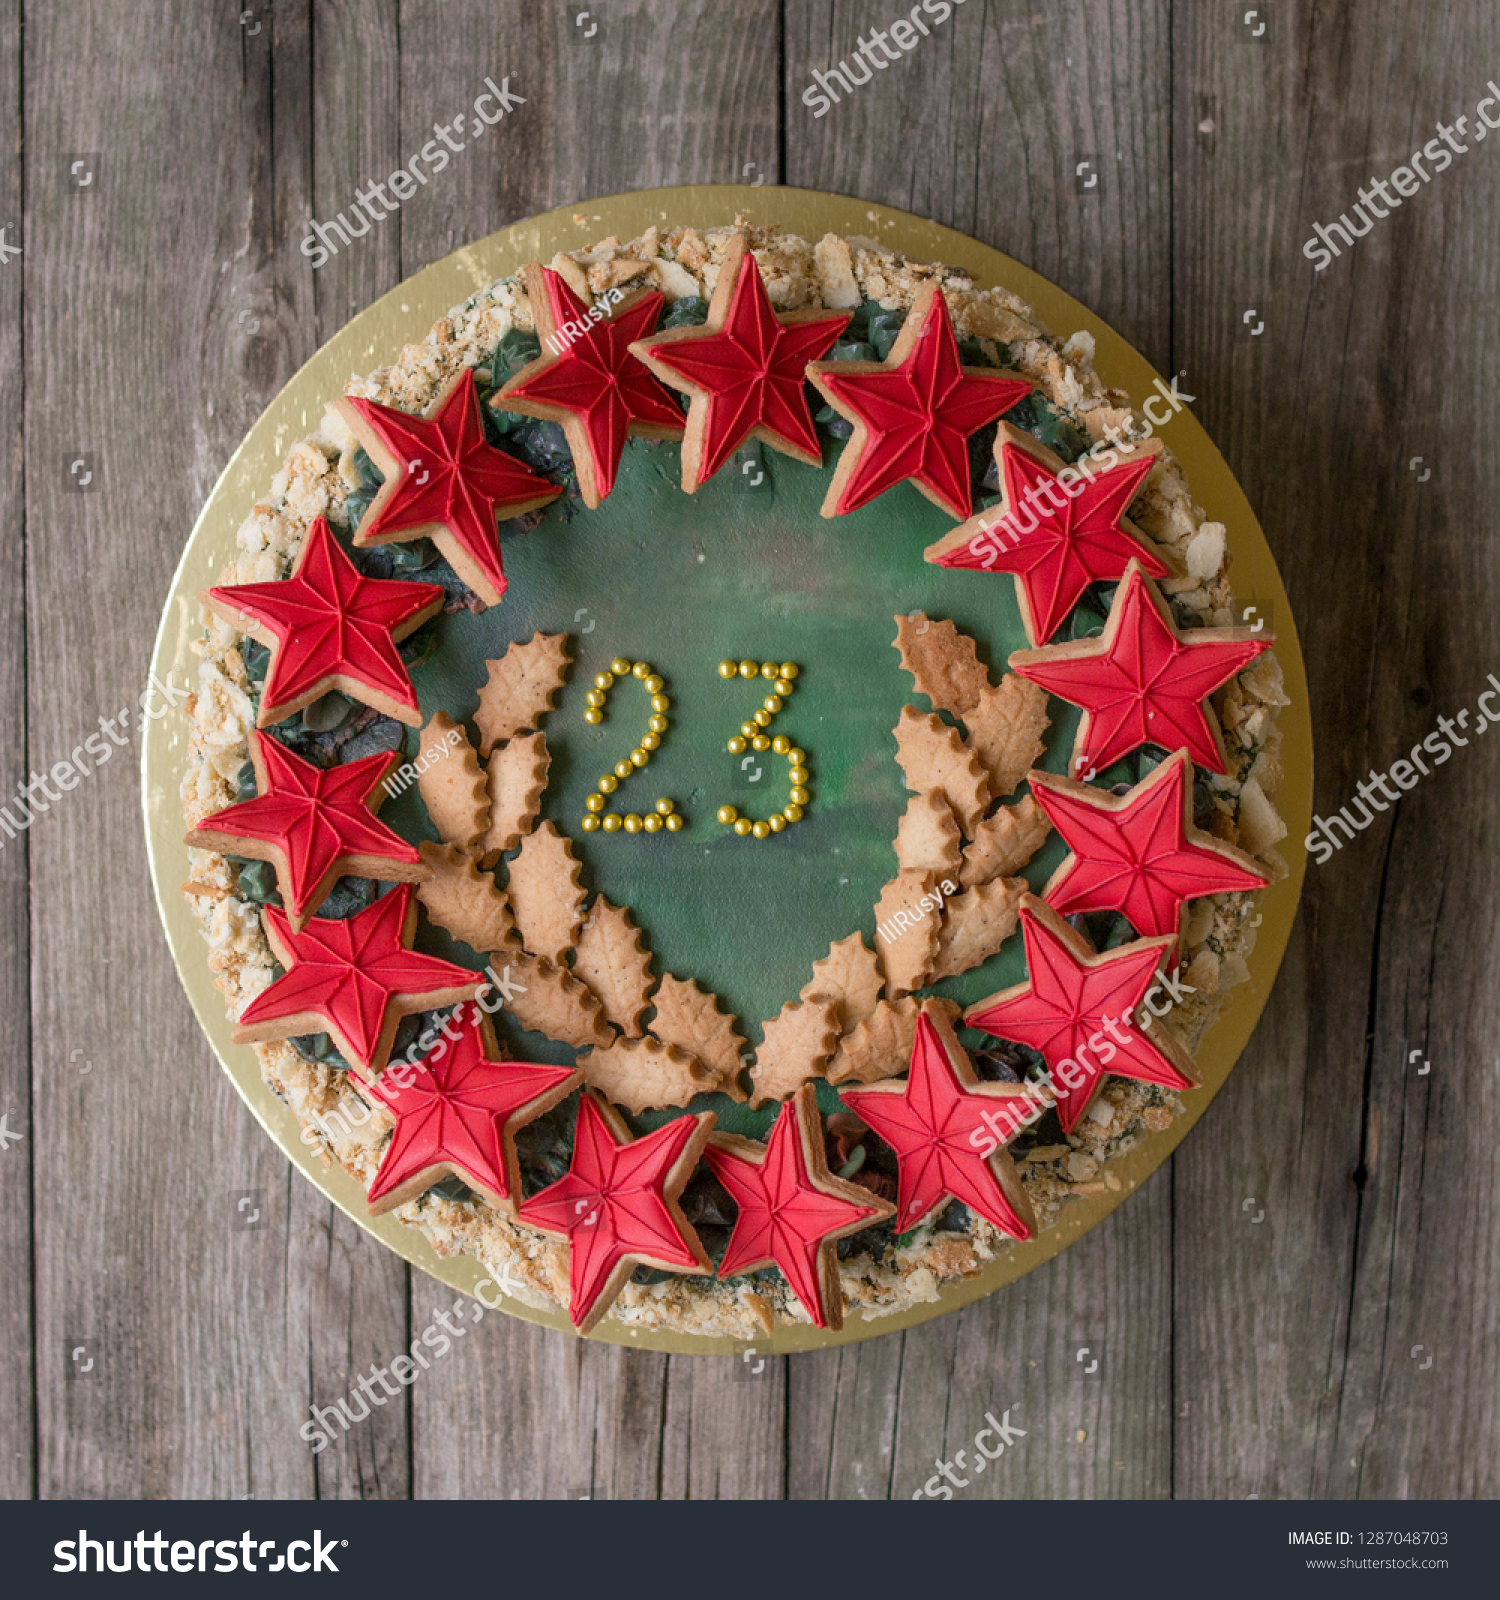 Sweet Napoleon cake with decor on 23 february holiday - Red stars cookies and number 23 - on wooden background. Close up, Selective focus #1287048703